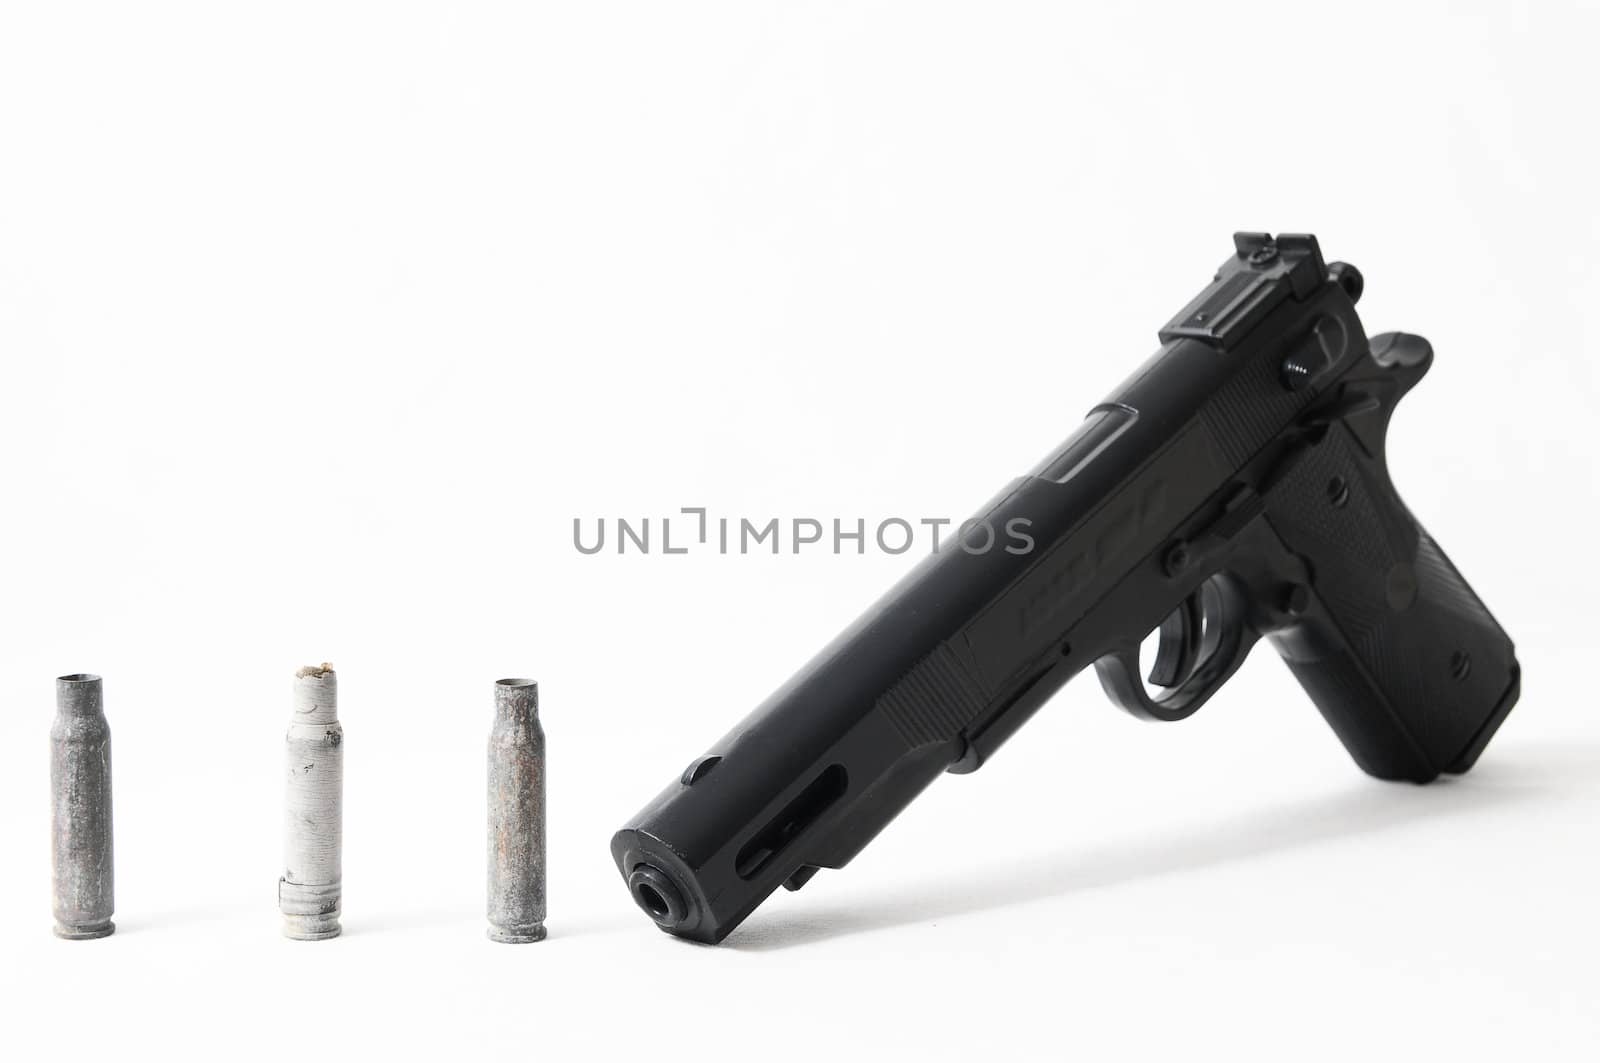 Pistol Gun and Bullets on a White Background